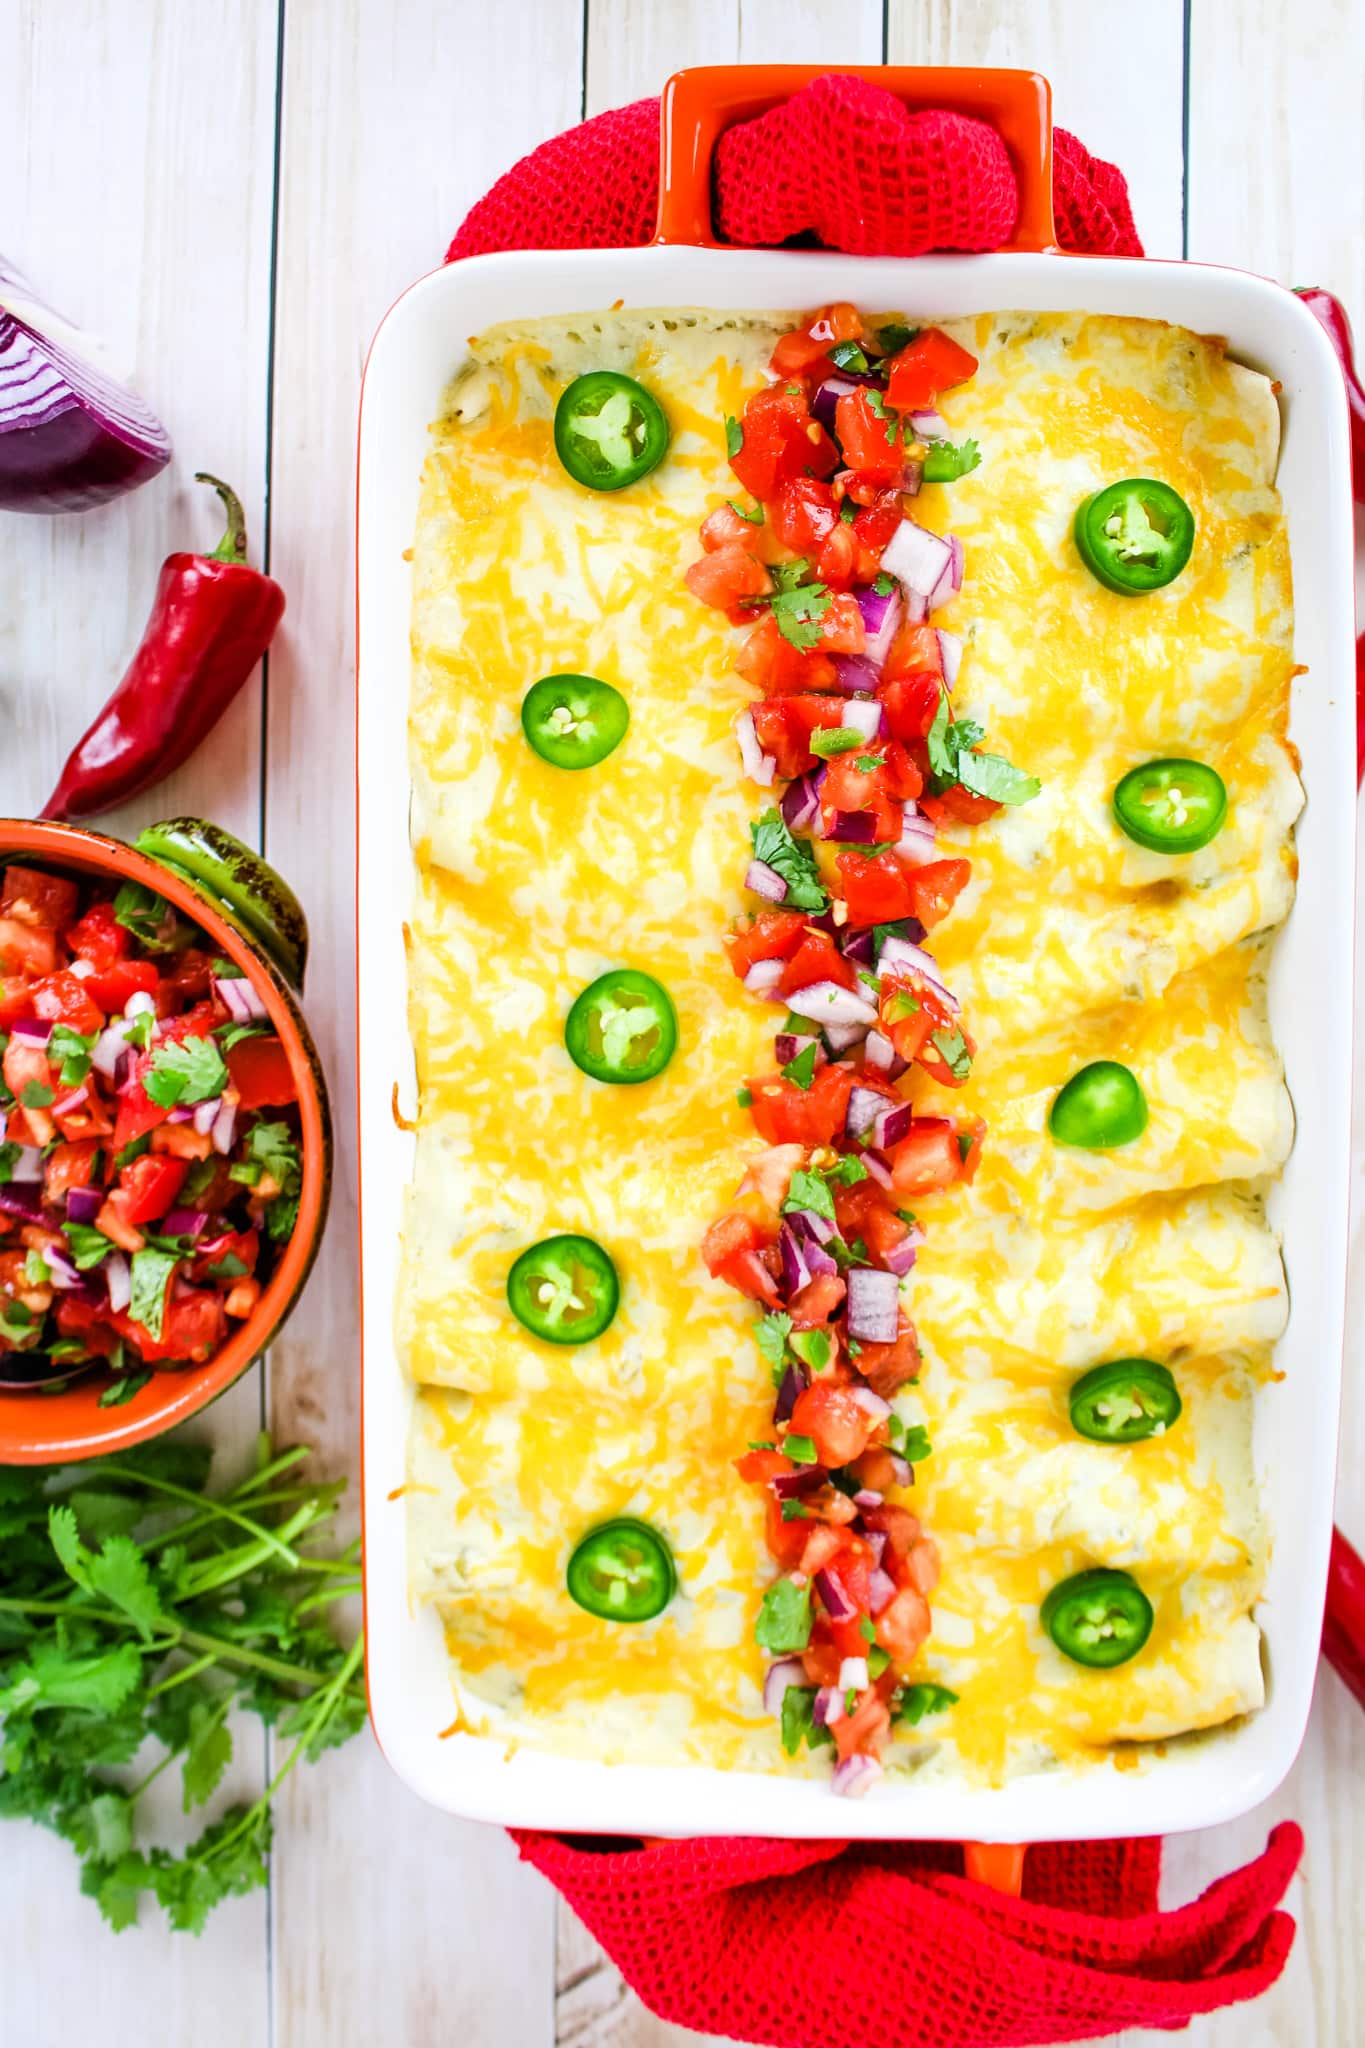 Sour cream enchiladas topped with melted cheese and pico de gallo salsa.